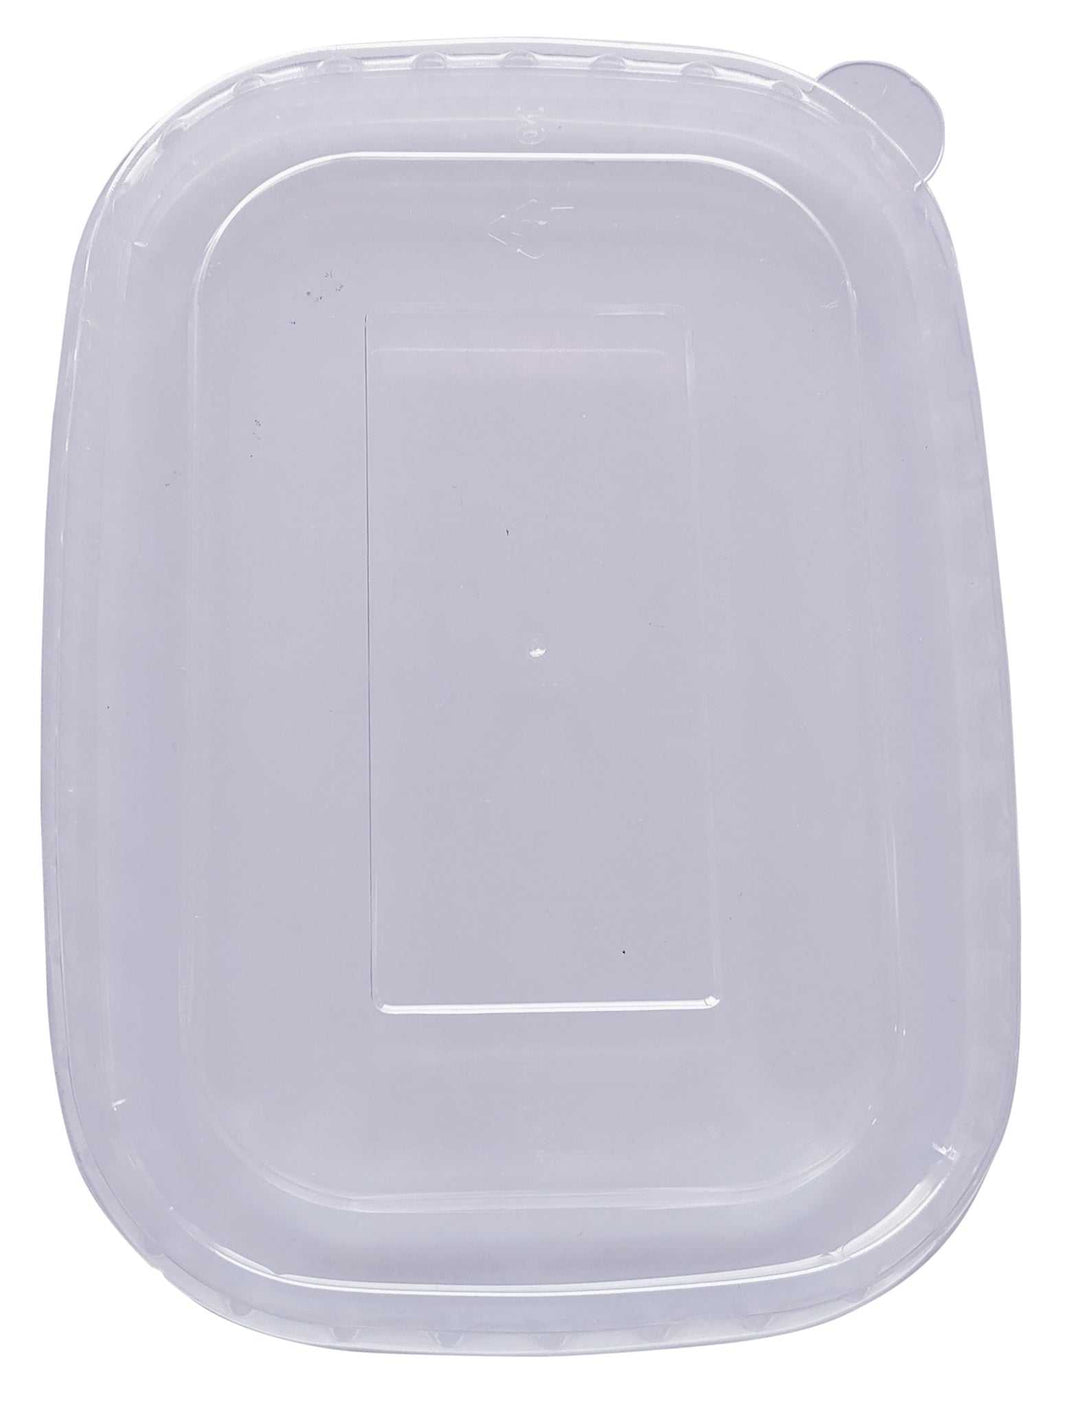 Kraft Food Container Box Rectangle boxes with Lids